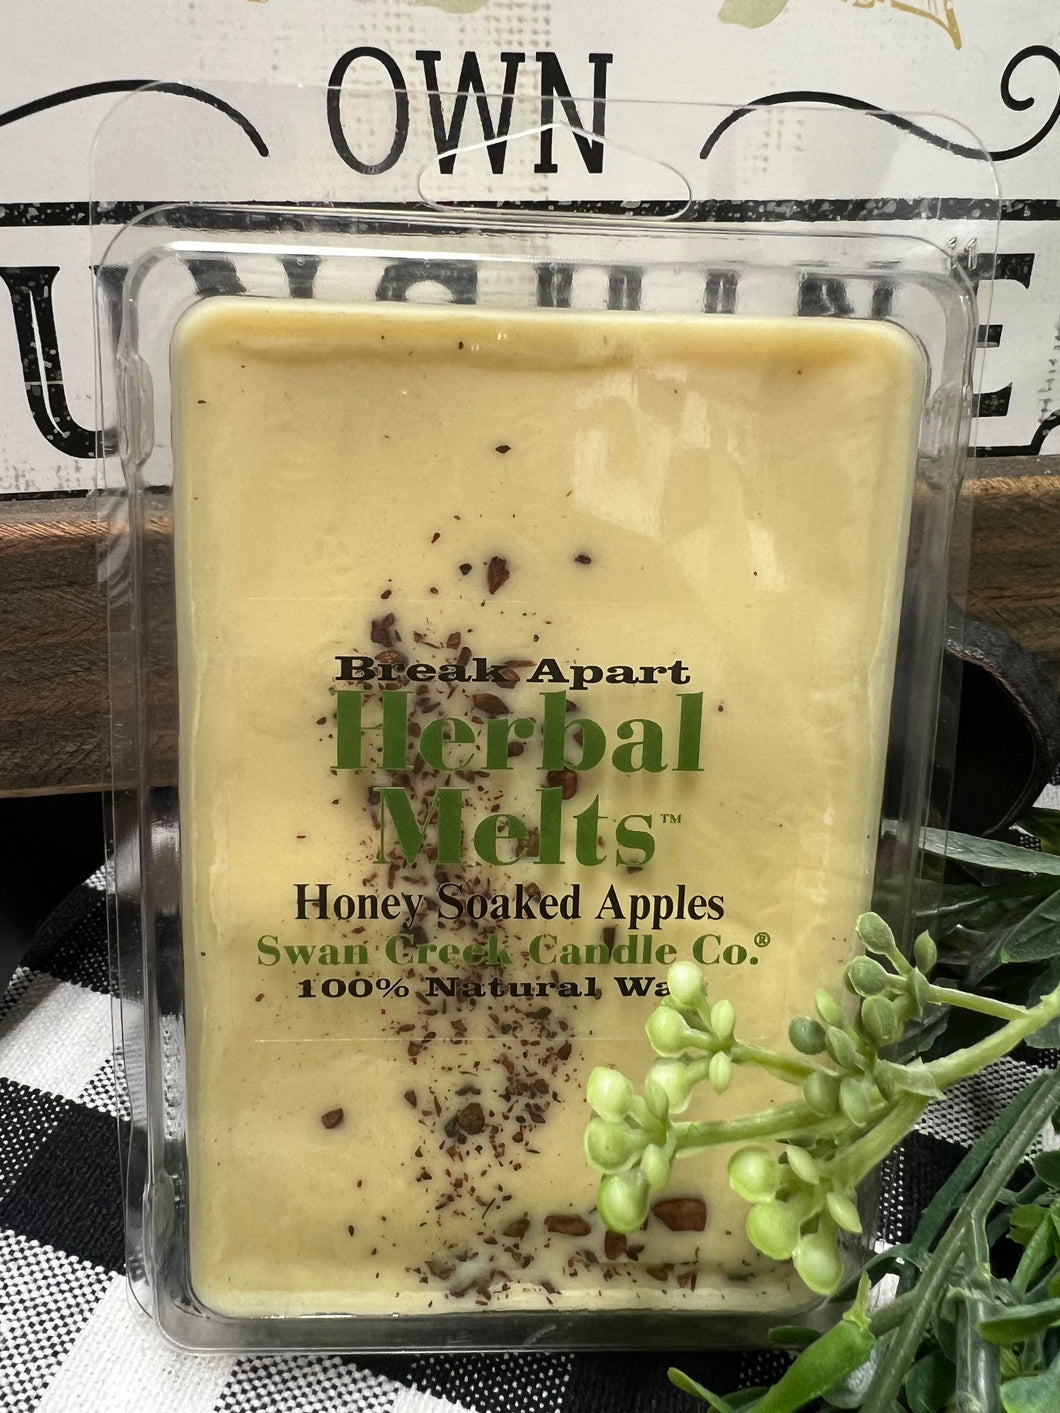 Swan Creek Candle Co. Honey Soaked Apples Herbal Melts